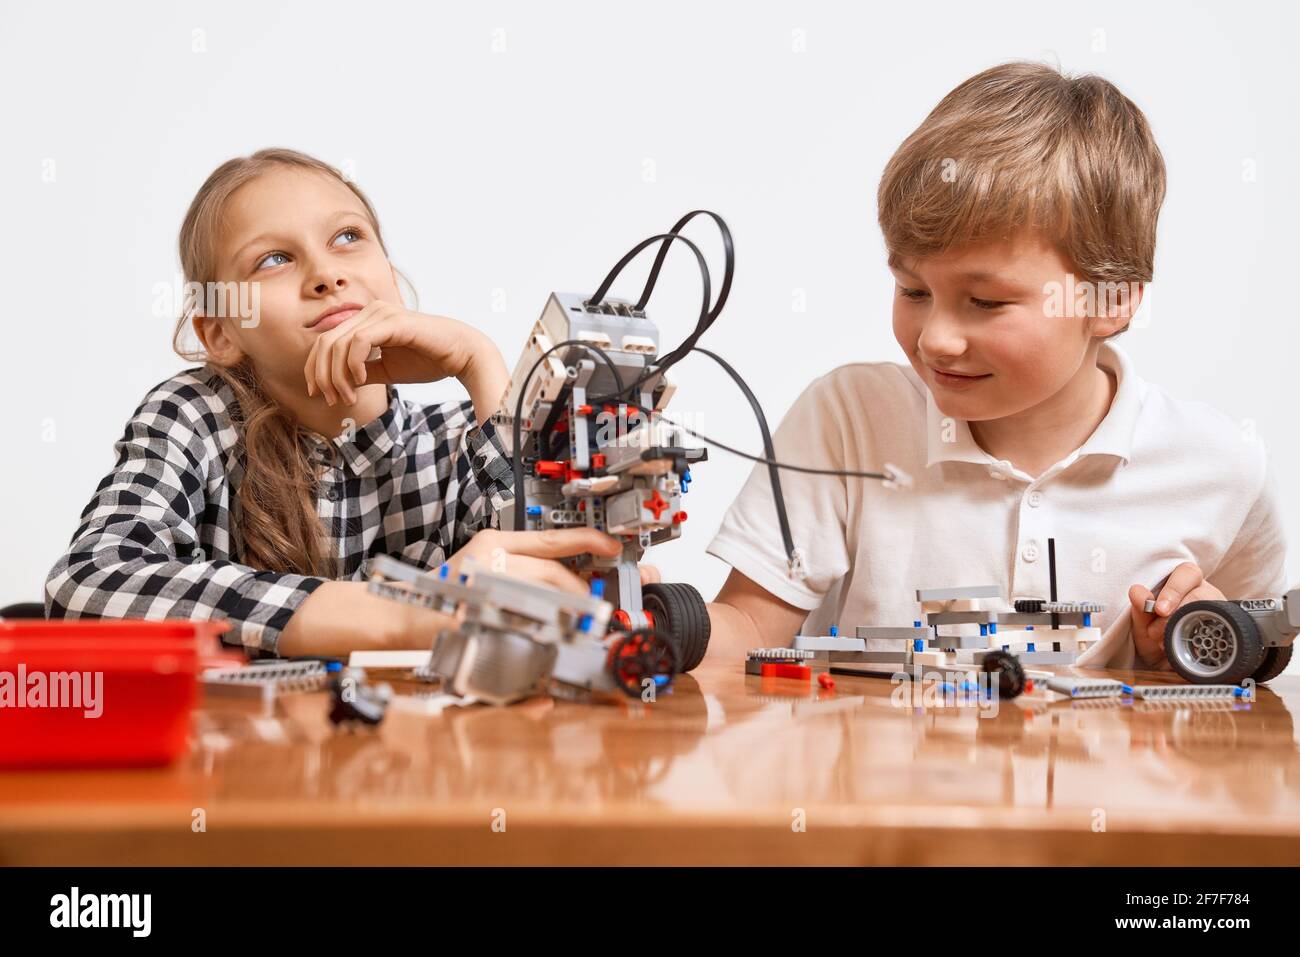 Building kit for kids on table. Front view of boy and girl having fun, creating vehicle. Science engineering. Nice interested friends working on project together, girl looking up and thinking. Stock Photo